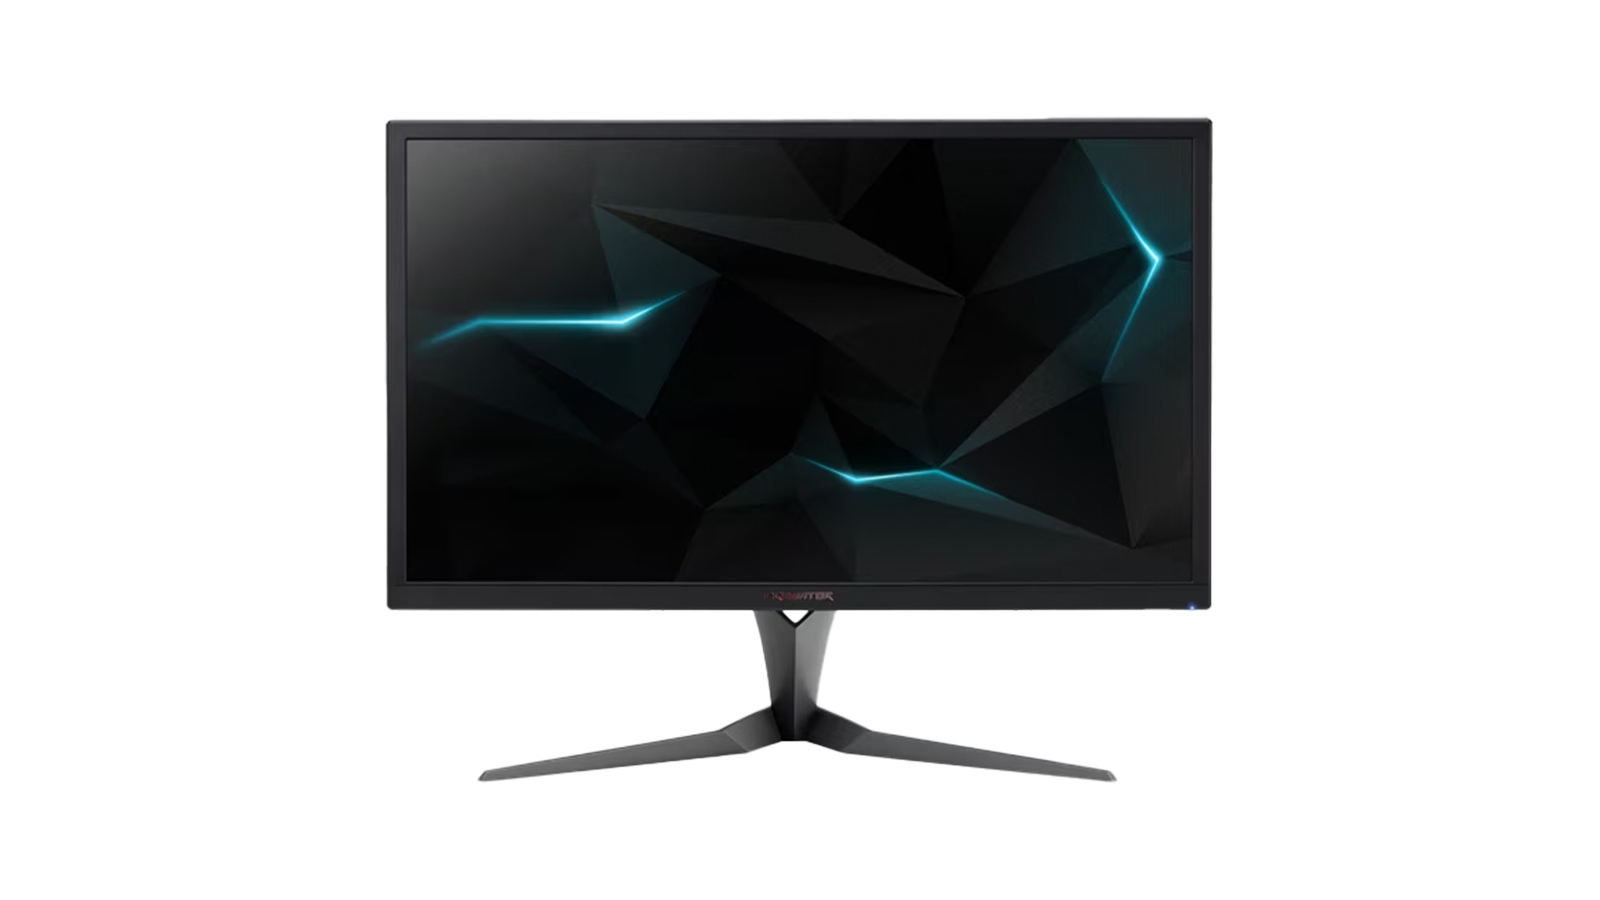 Acer Predator X27 - The best HDR gaming monitor.